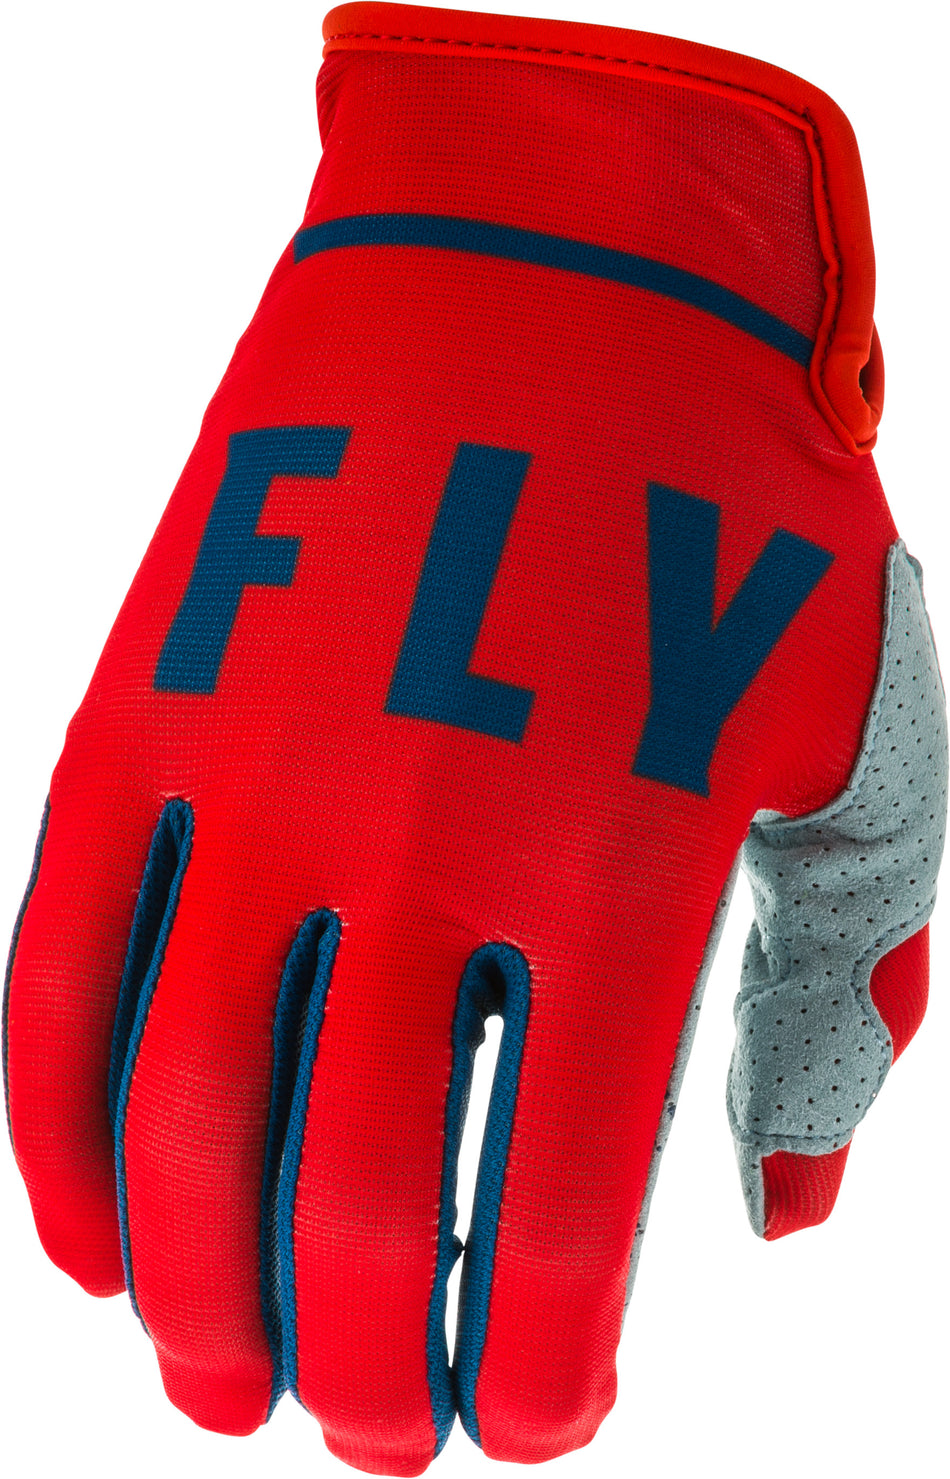 FLY RACING Lite Gloves Red/Slate/Navy Sz 09 373-71209